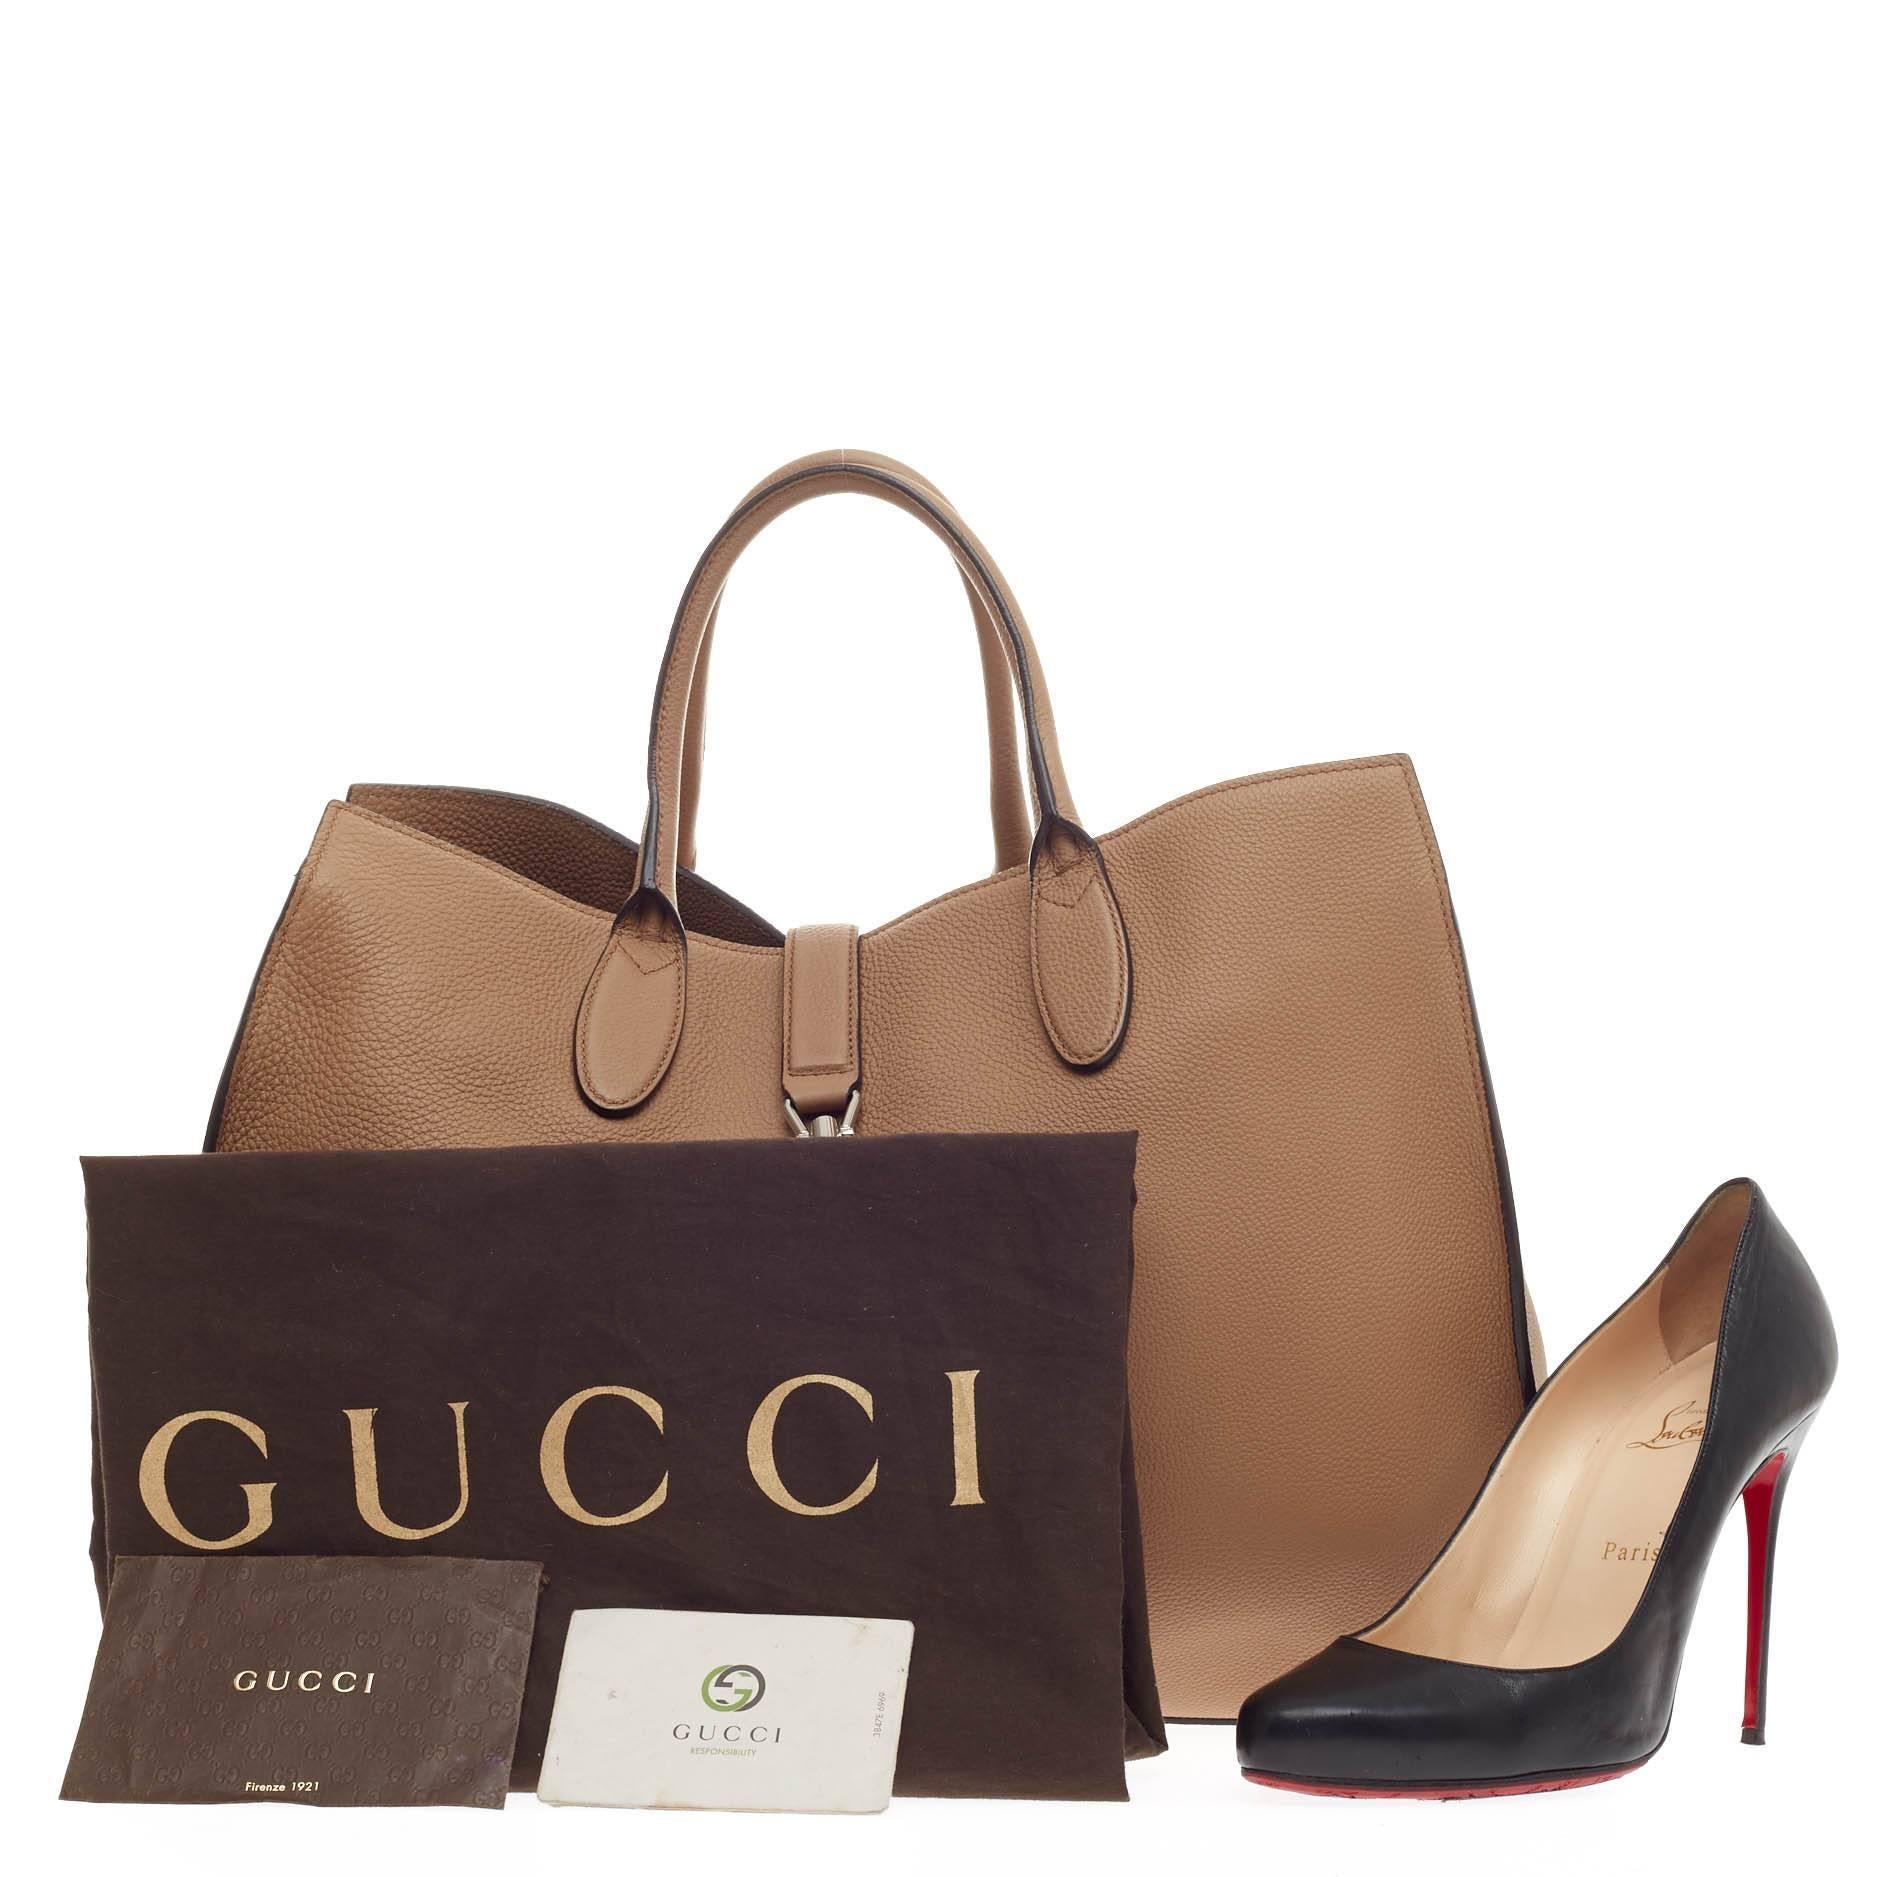 This authentic Gucci Jackie Soft Tote Pebbled Leather Large is a must-have tote fit for the modern woman. Constructed from beige pebbled leather, this iconic, minimalist take on the iconic Jackie features a soft-structured silhouette, dual-rolled